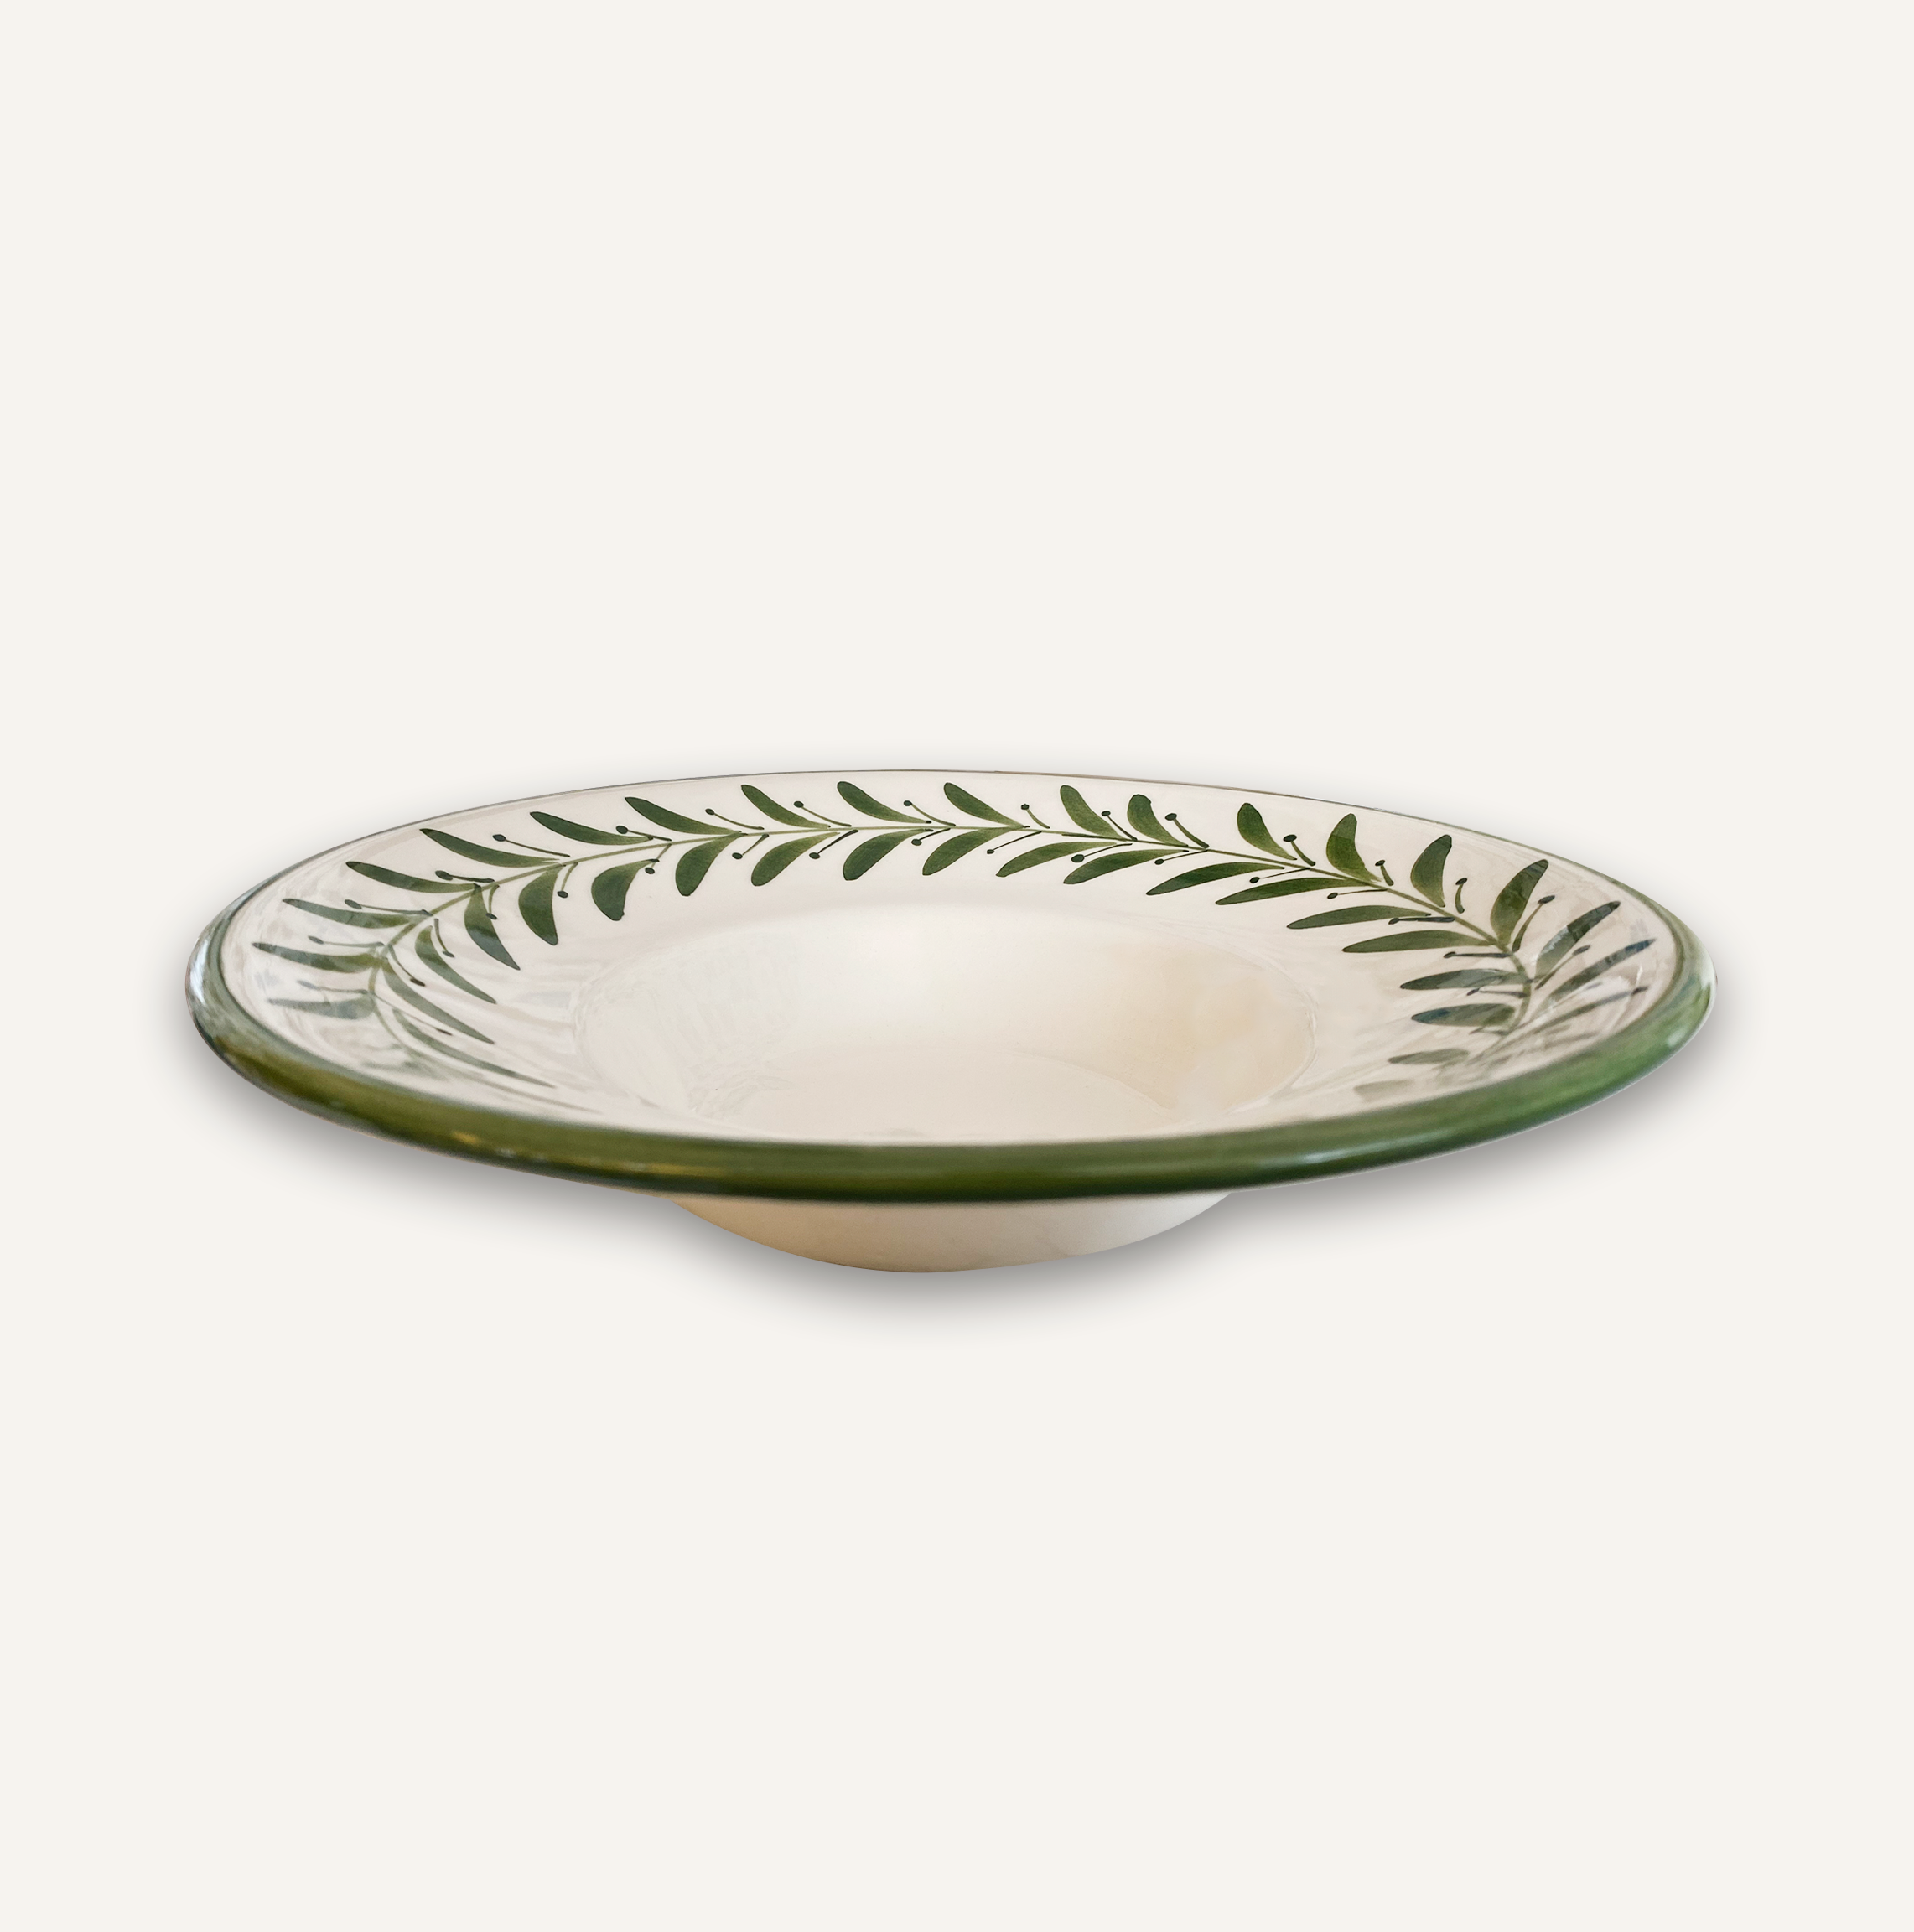 Helecho Pasta Plate (set of 2)